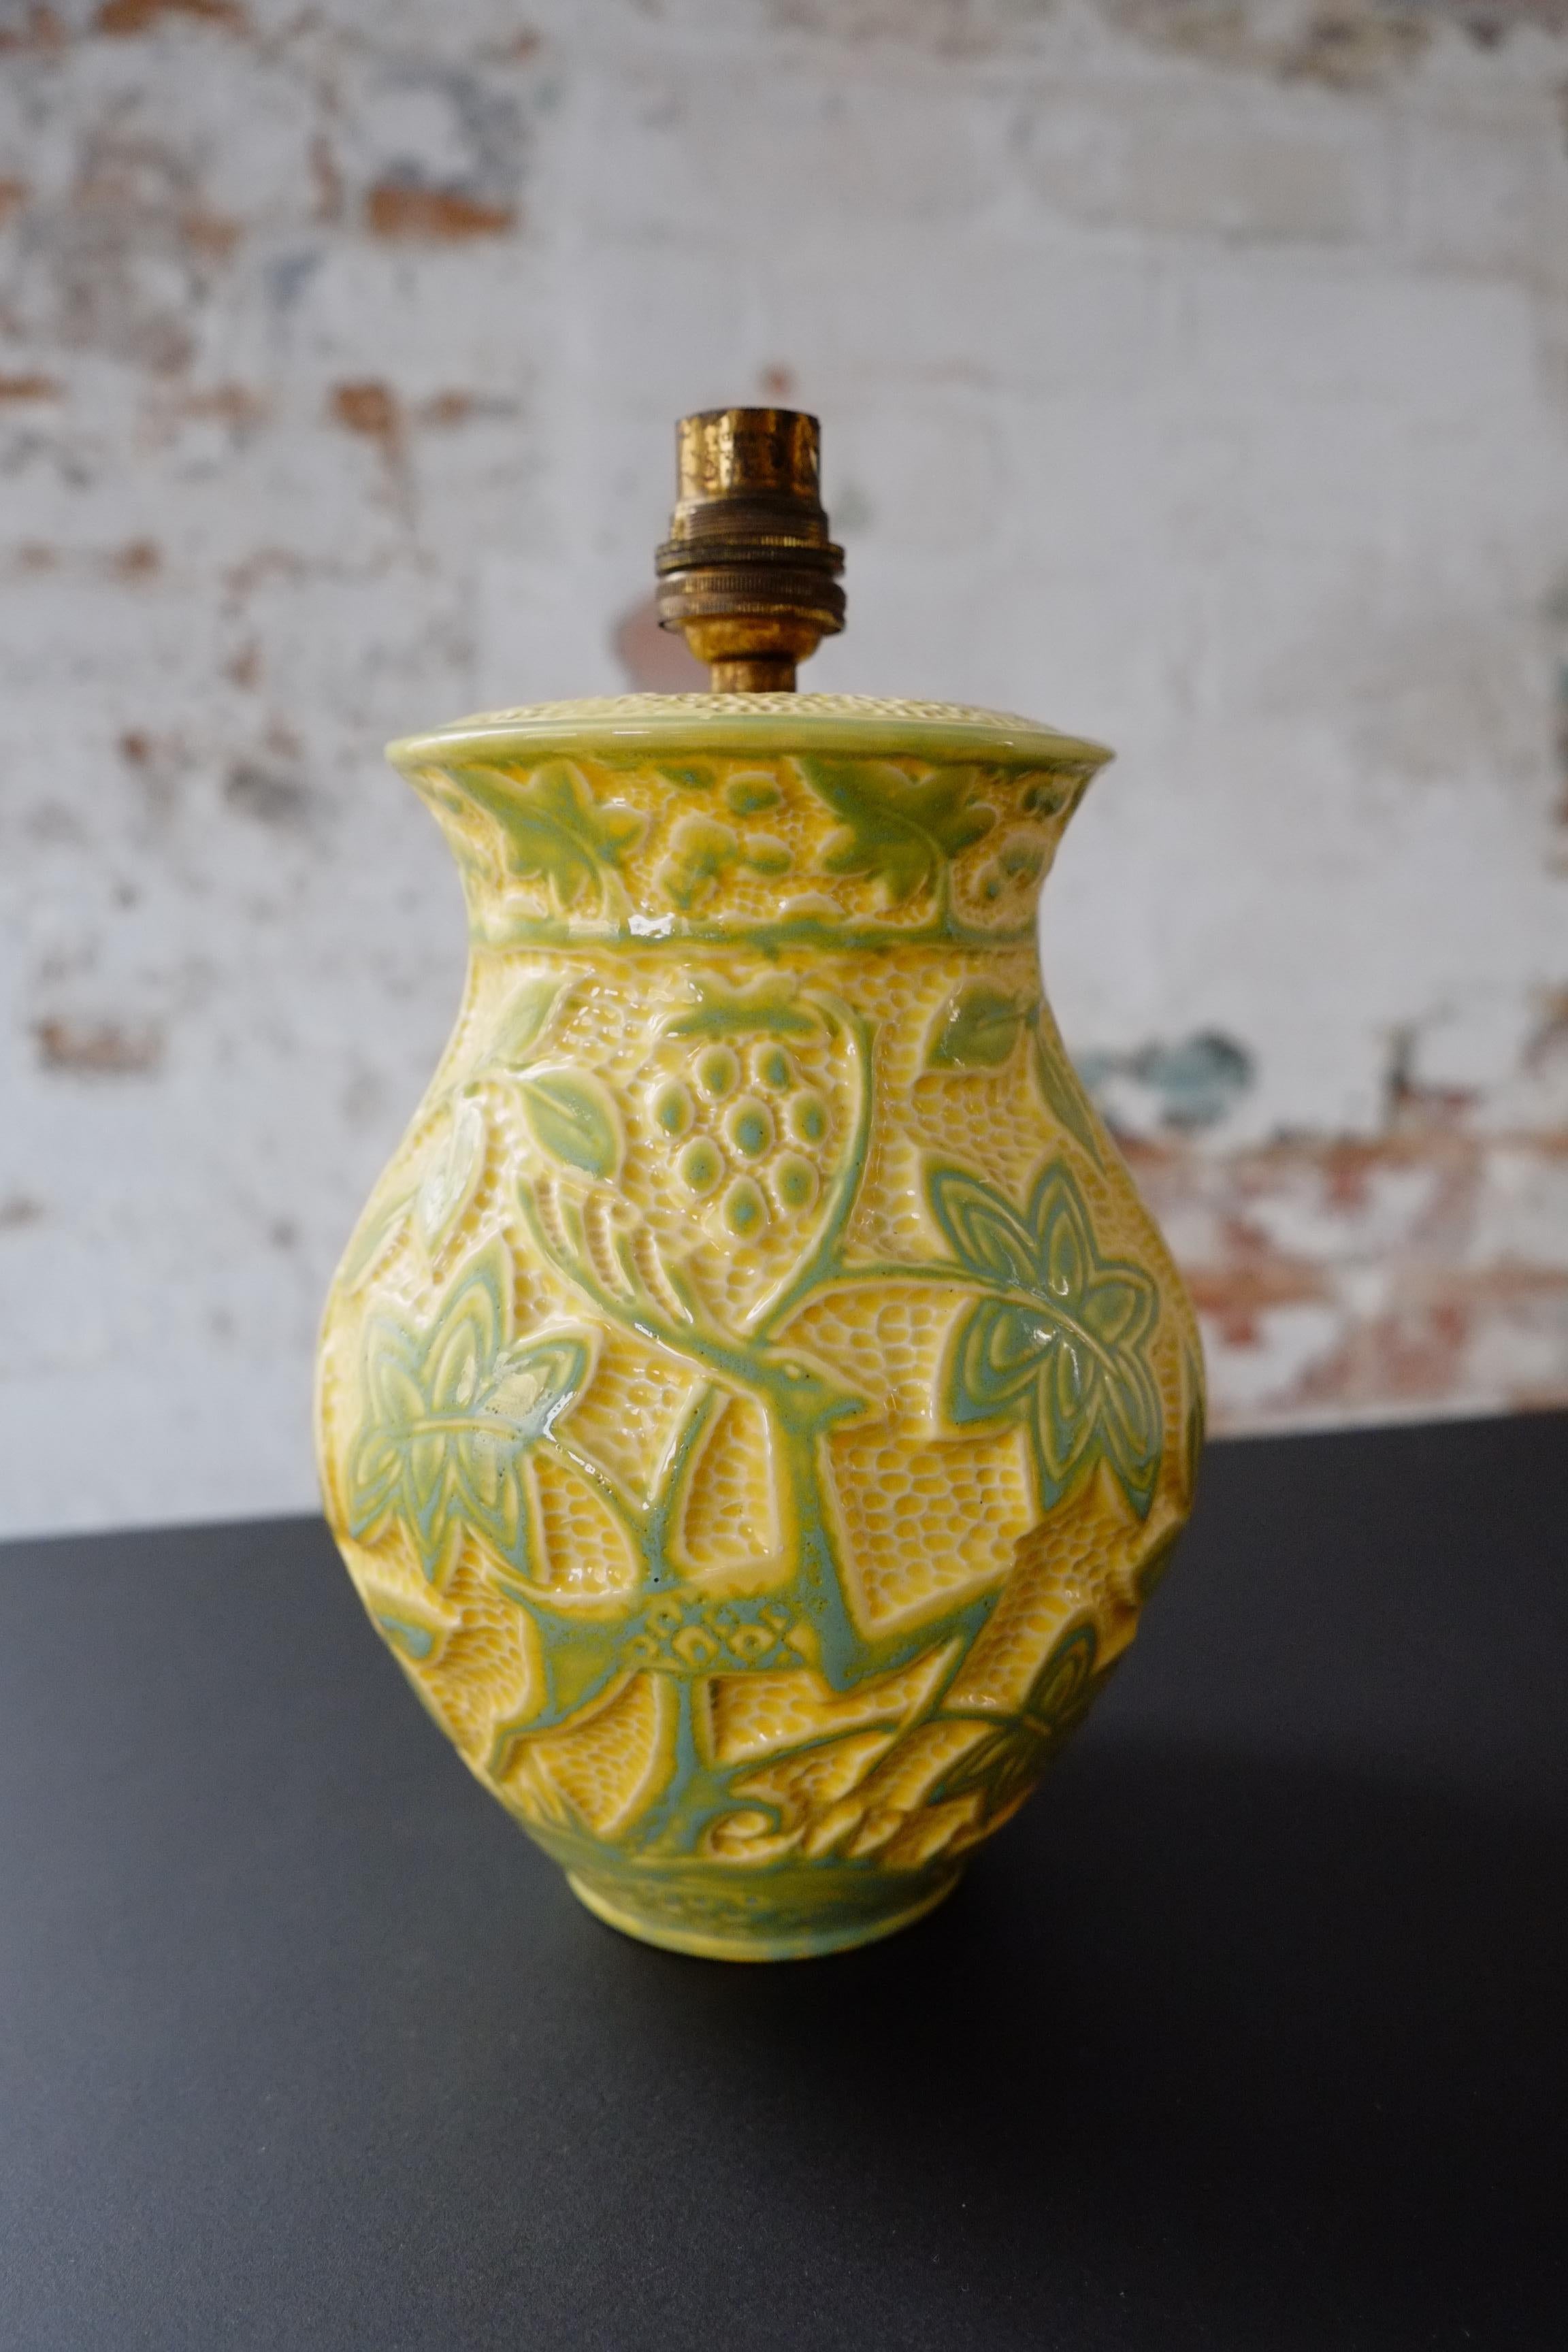 A lovely yellow and pastel green Art Nouveau-style table lamp by Crown Devon. Made in England in the mid-20th Century. The lamp base has been carved with flower and deer motif decorations. A very sweet original vintage item. There is a stamp at the